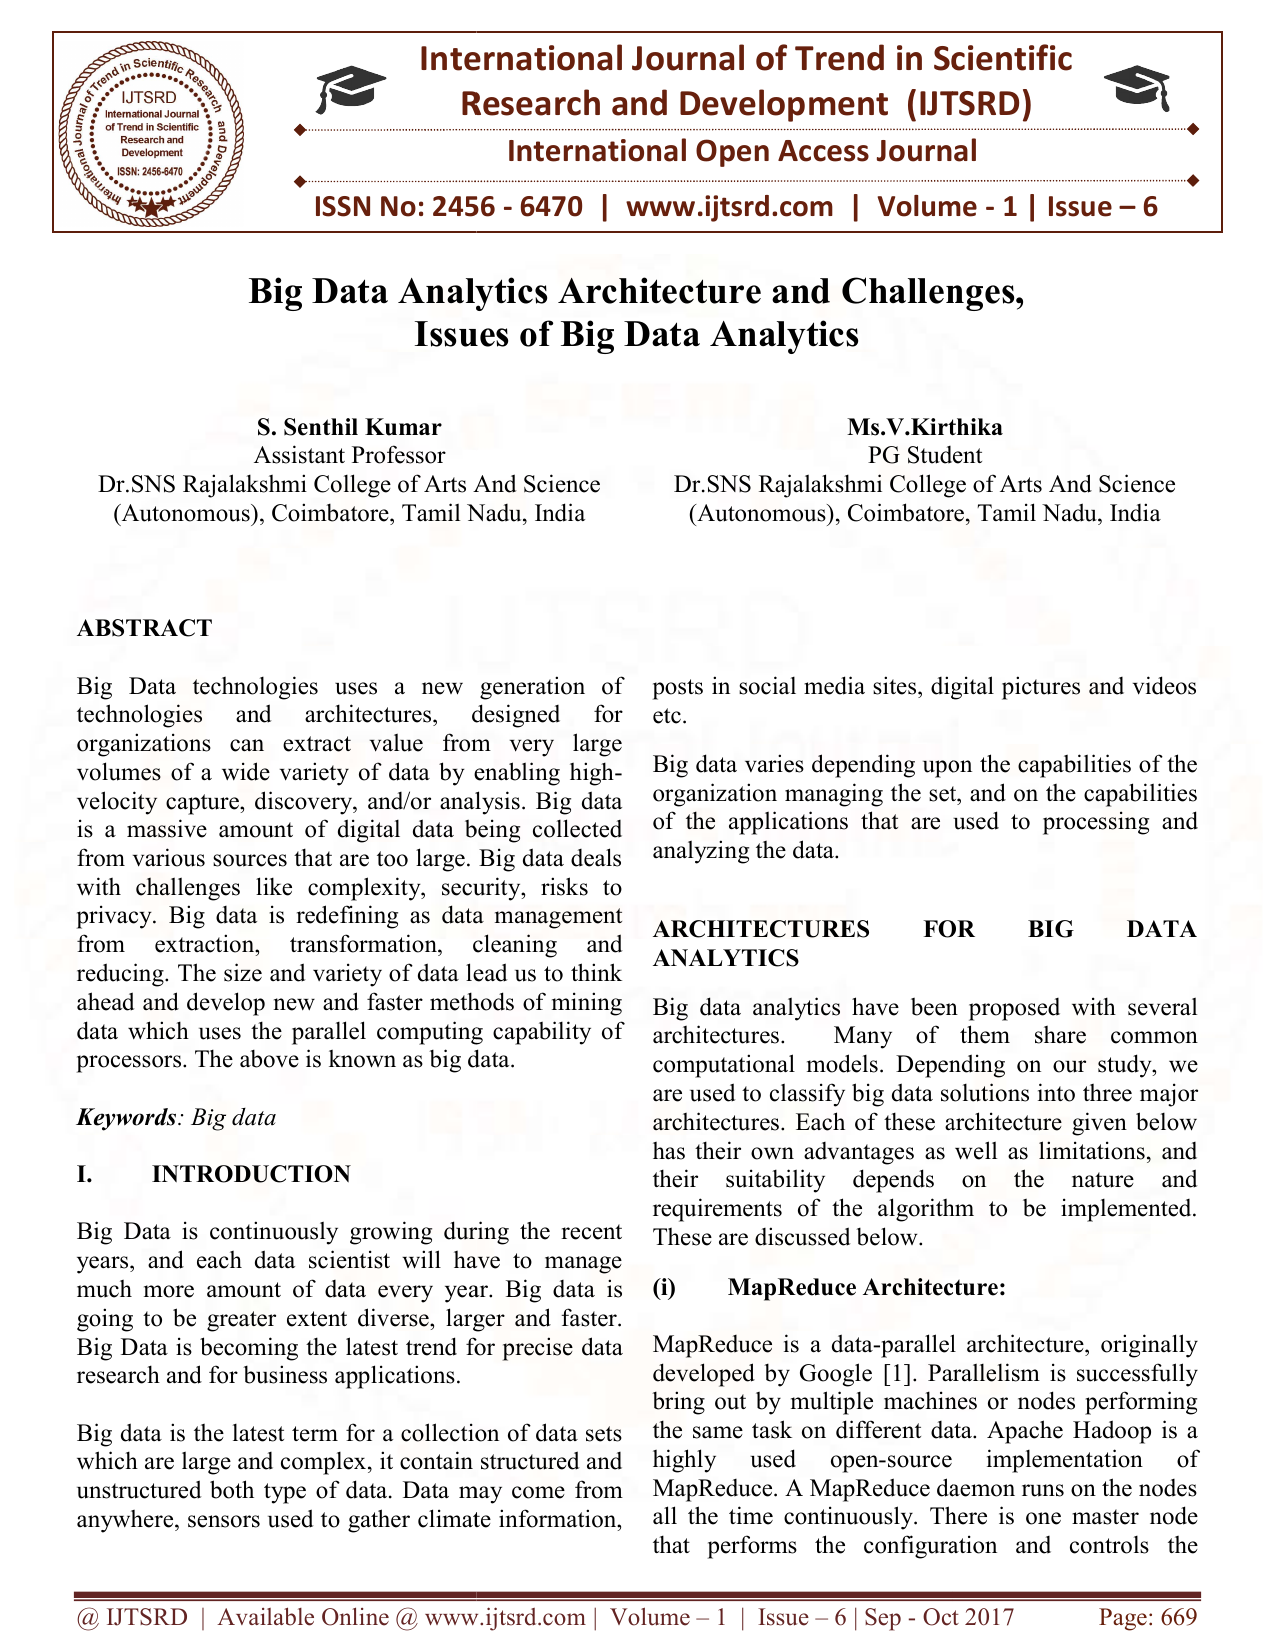 Big Data Analytics Architecture and Challenges, Issues of ...